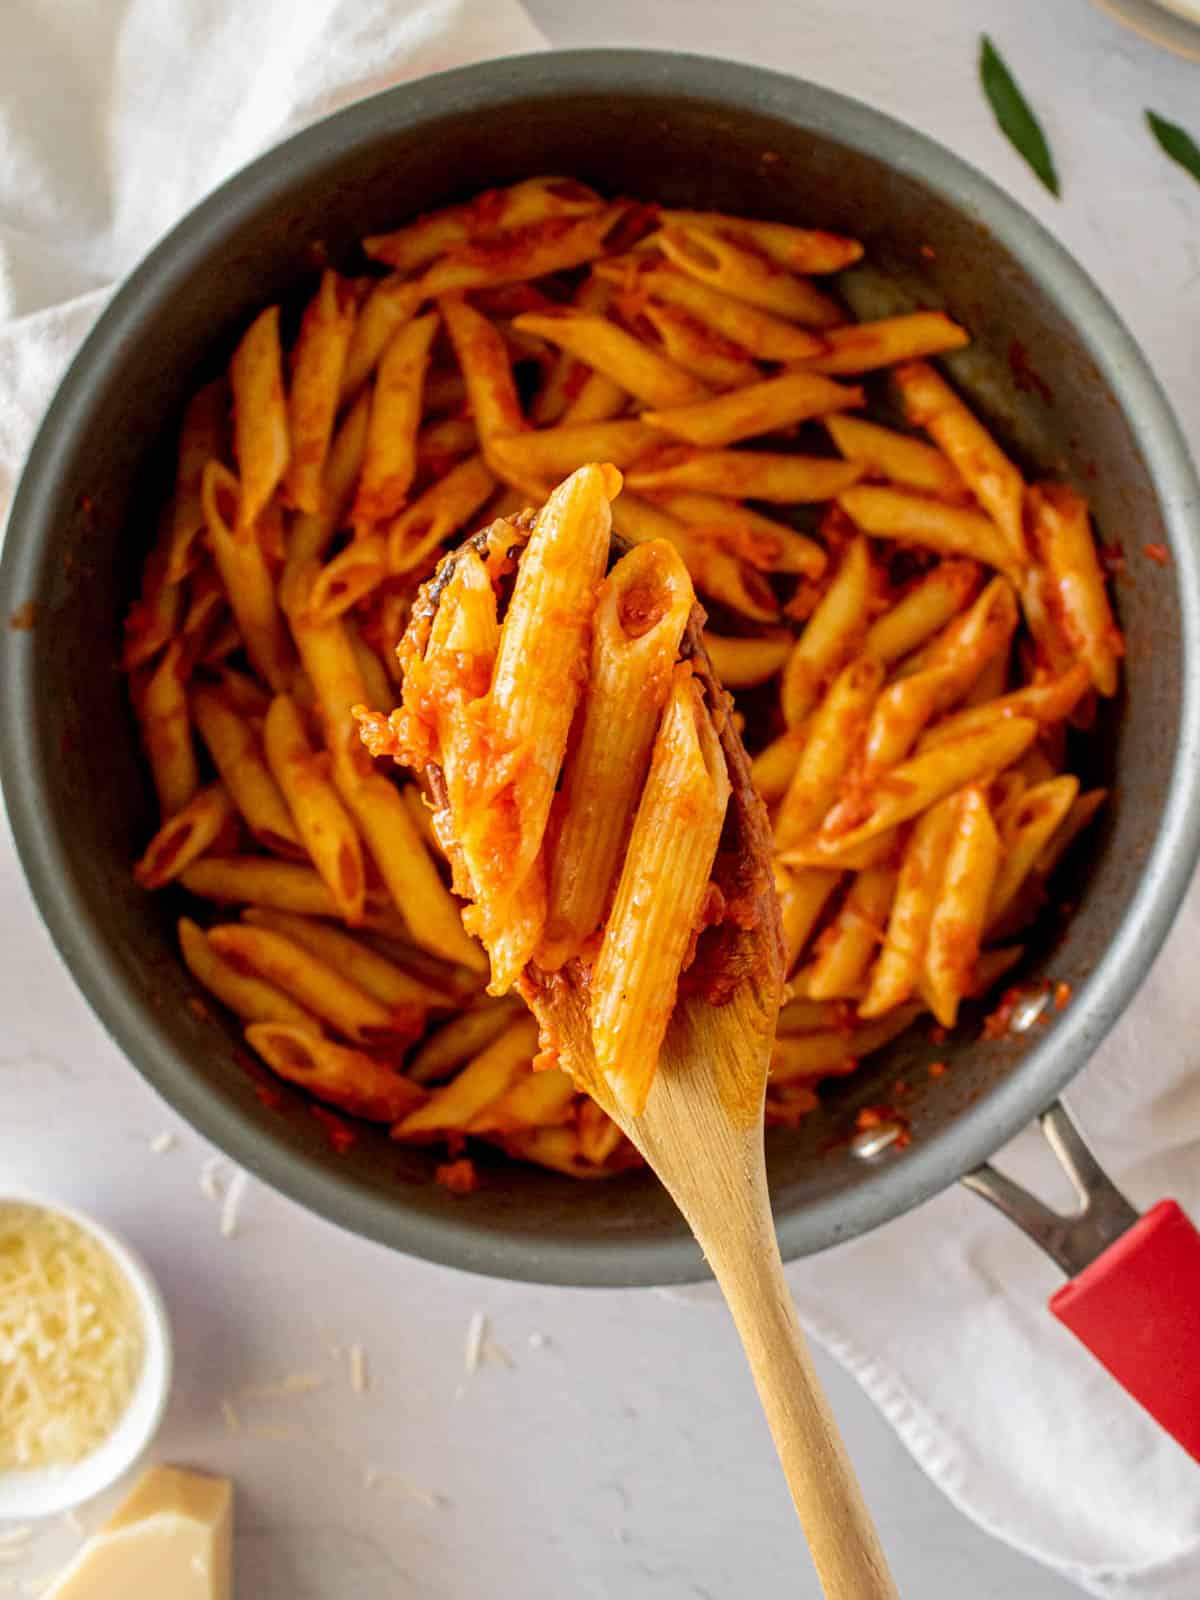 Tomato and veggie sauce with pasta in a pan.